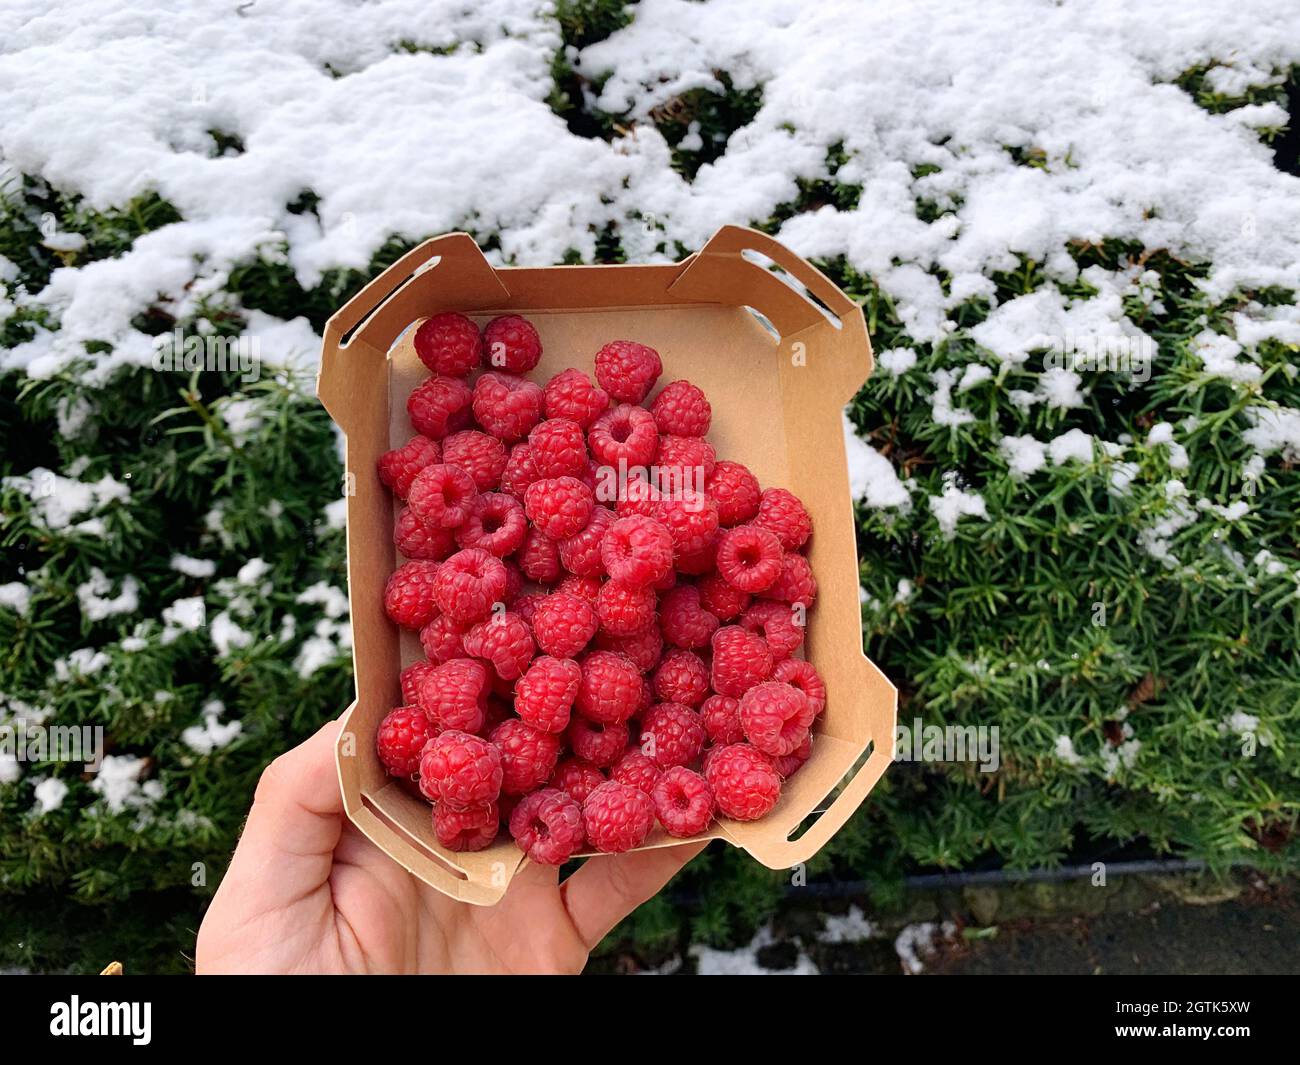 High Angle View Of Hand Holding Box Of Raspberries Against Snow Background Stock Photo